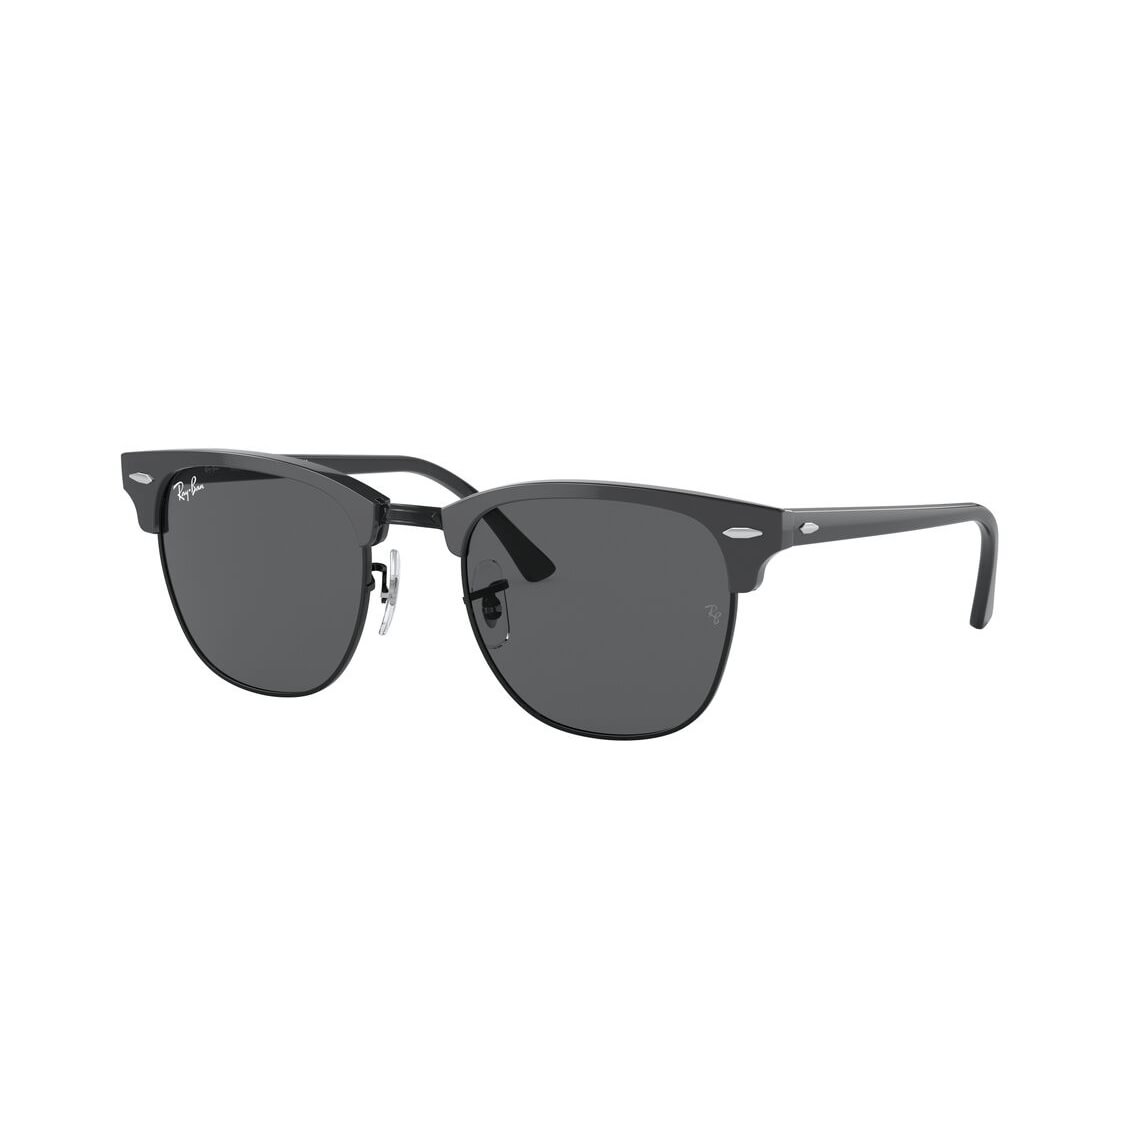 Ray-Ban Clubmaster RB3016 1367B1 5121